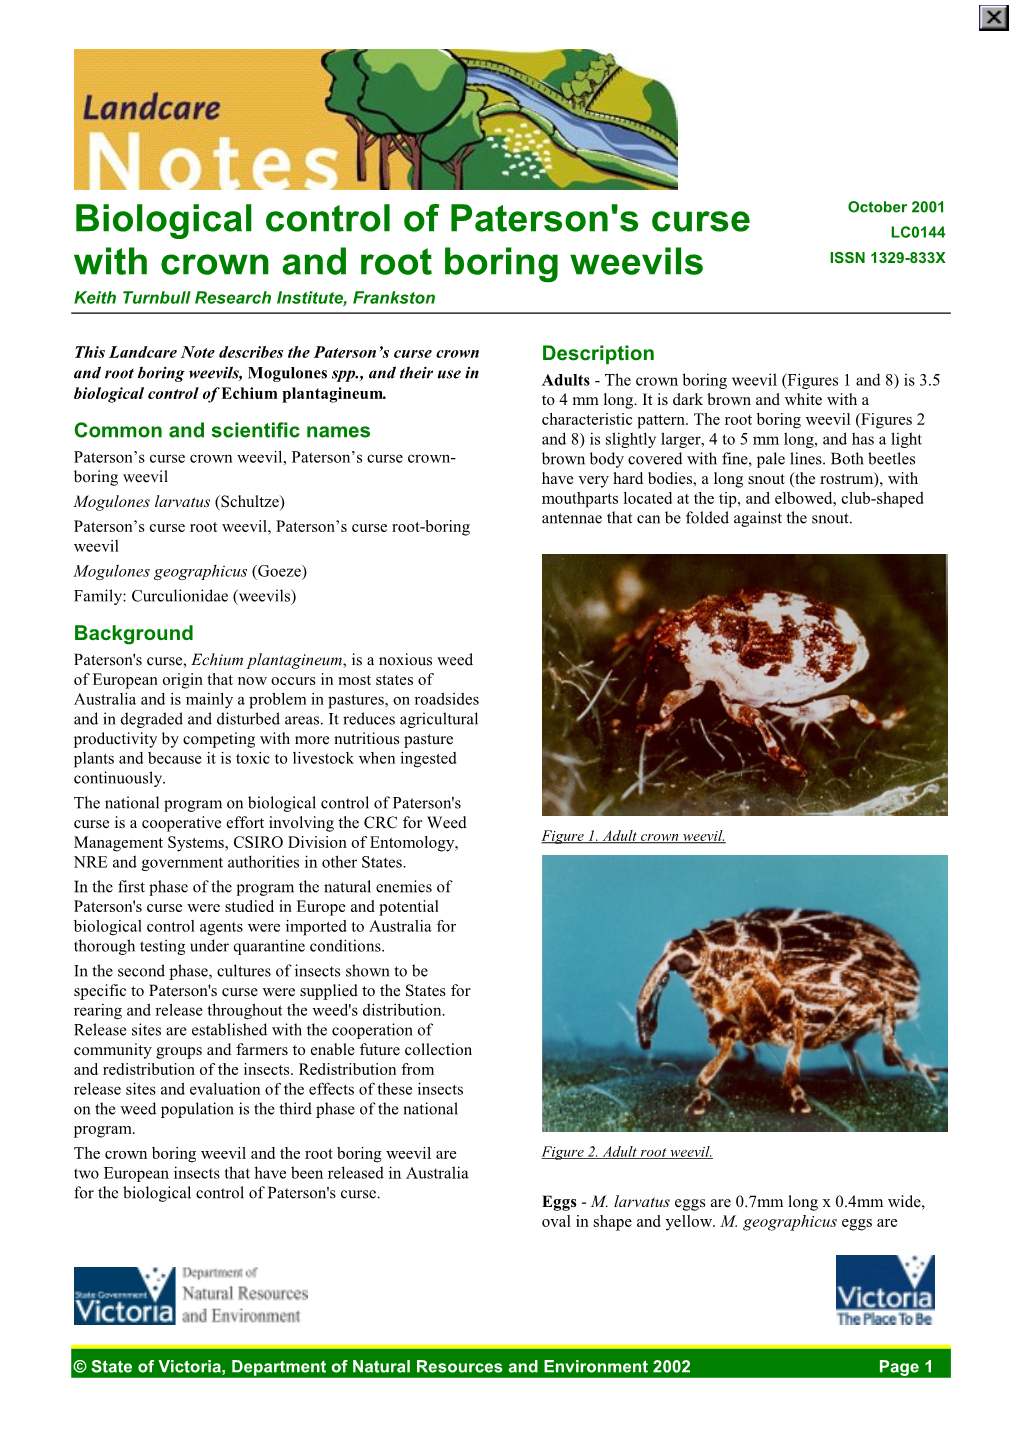 Bio-Control of Paterson's Curse with Crown and Root Boring Weevils